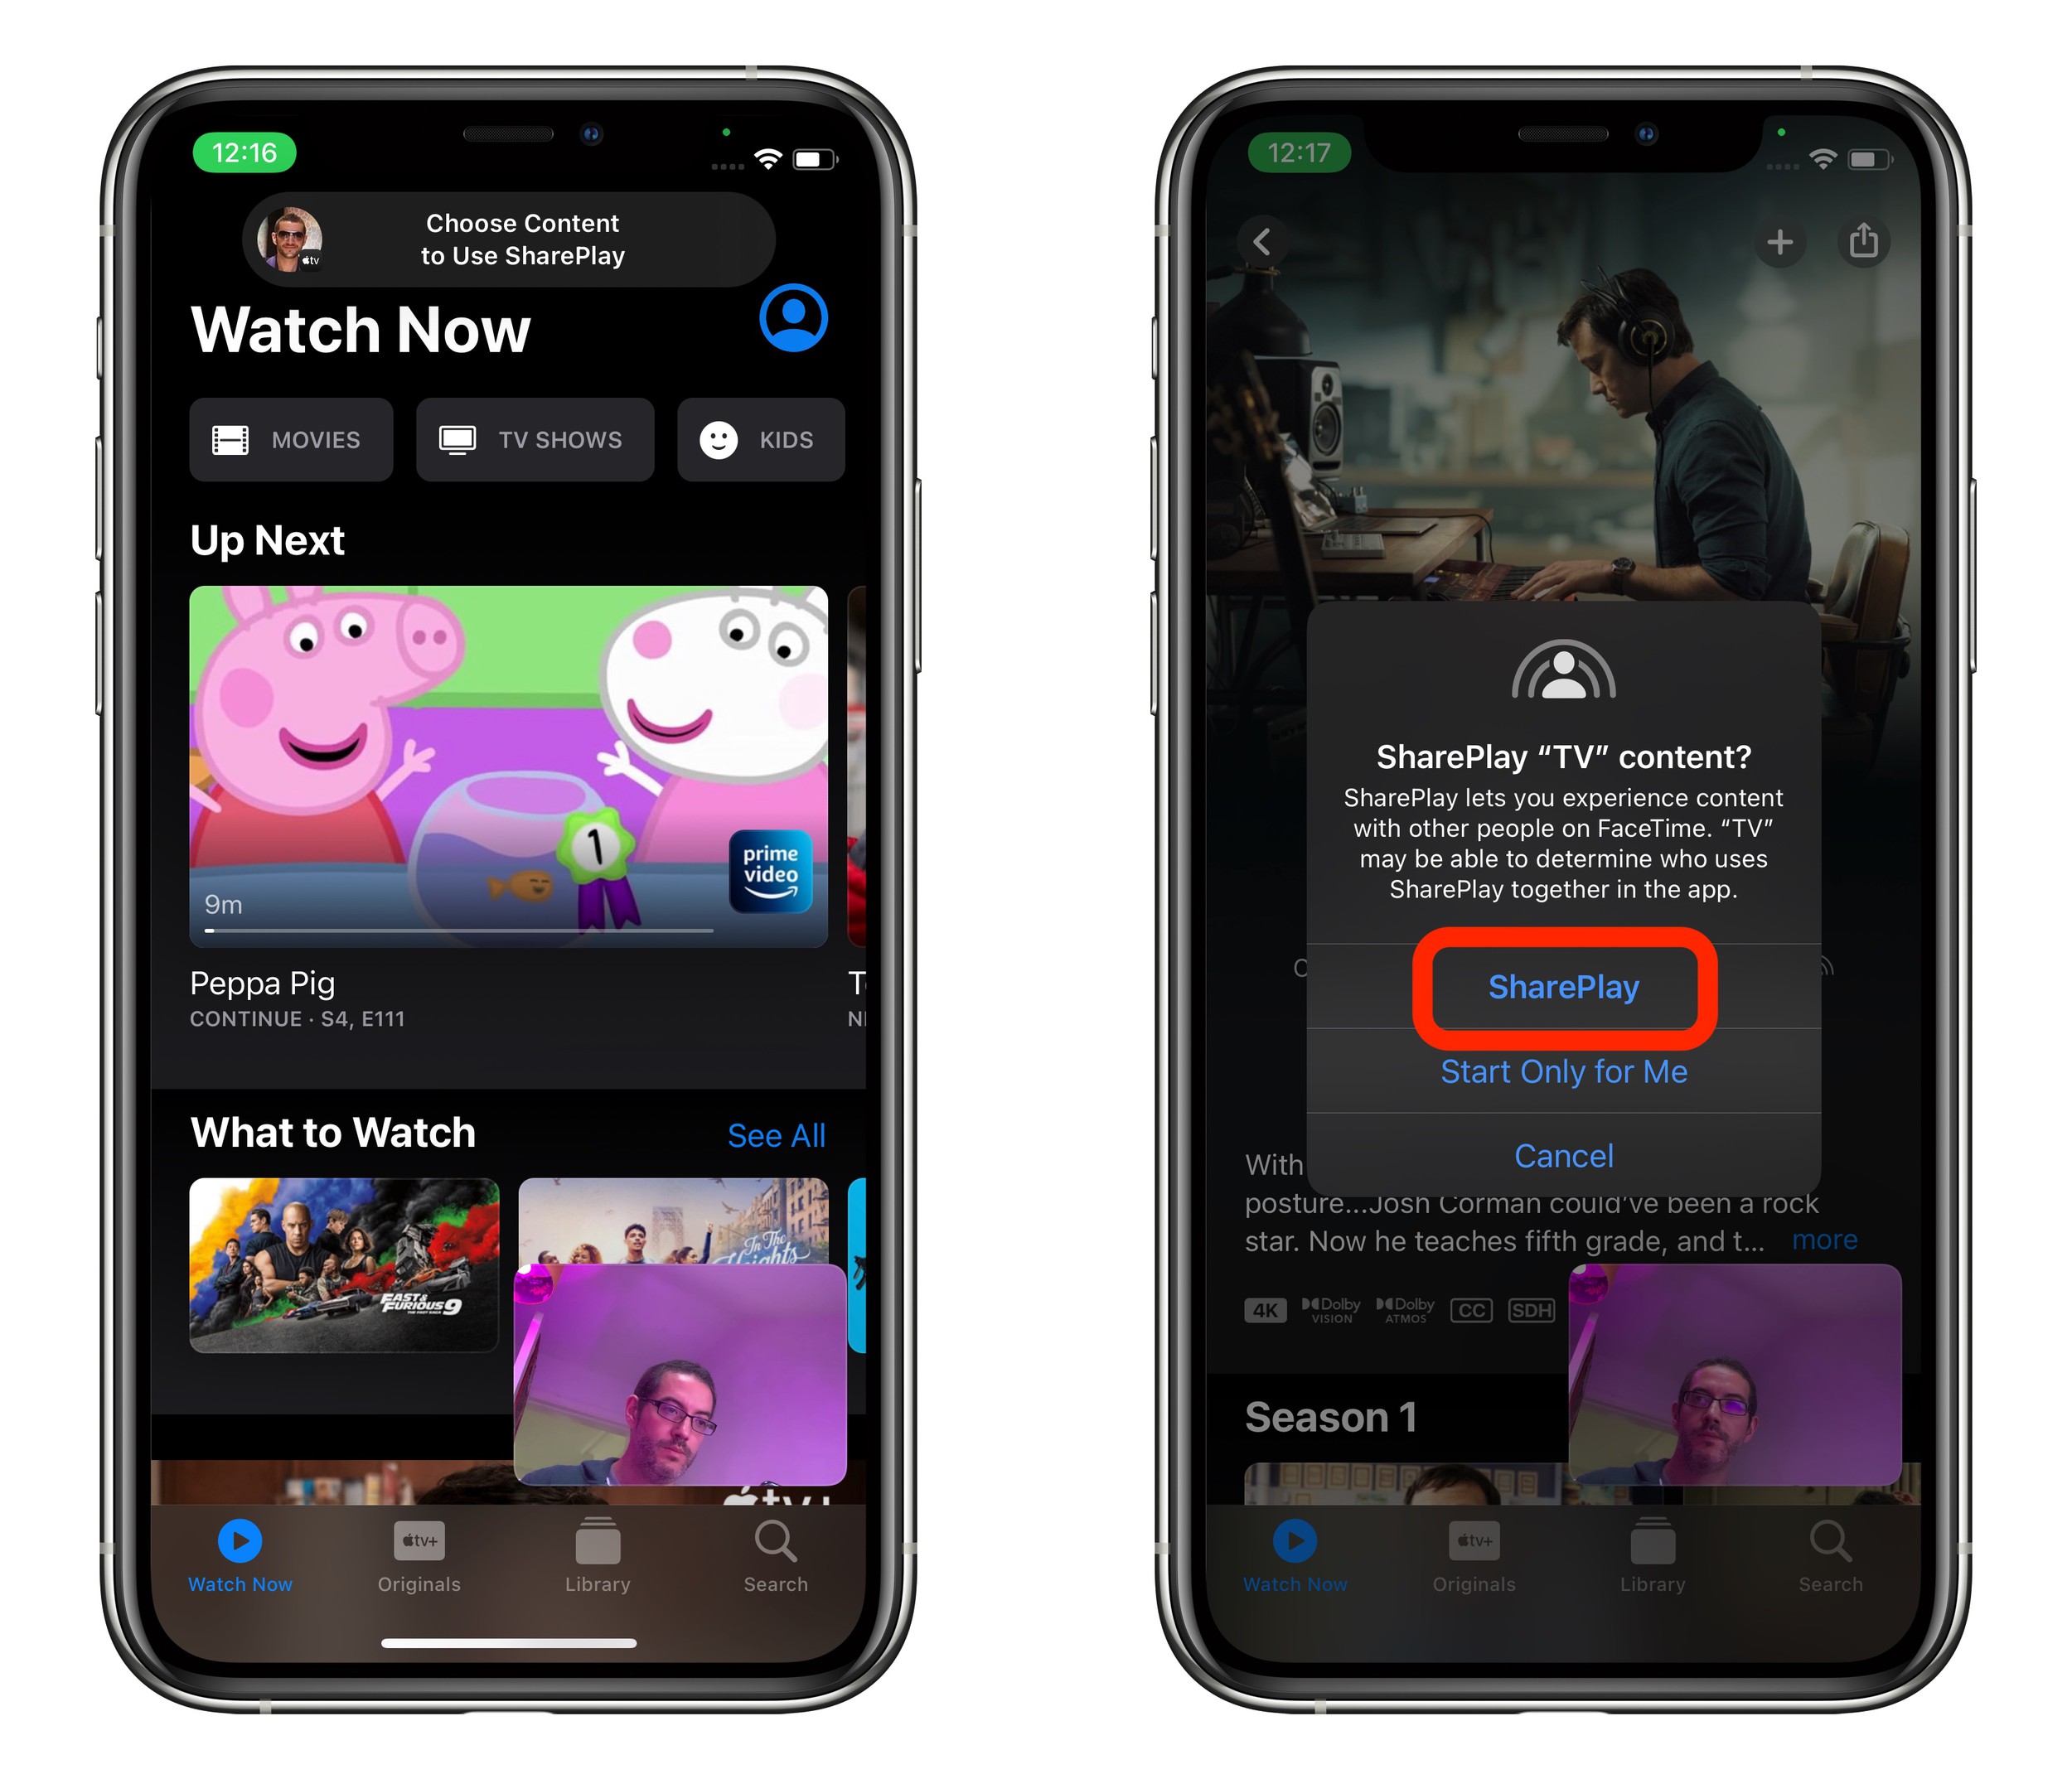 iOS 15: How to Watch Movies and TV Shows Together Using FaceTime - App Where You Can Facetime And Watch Movies Together